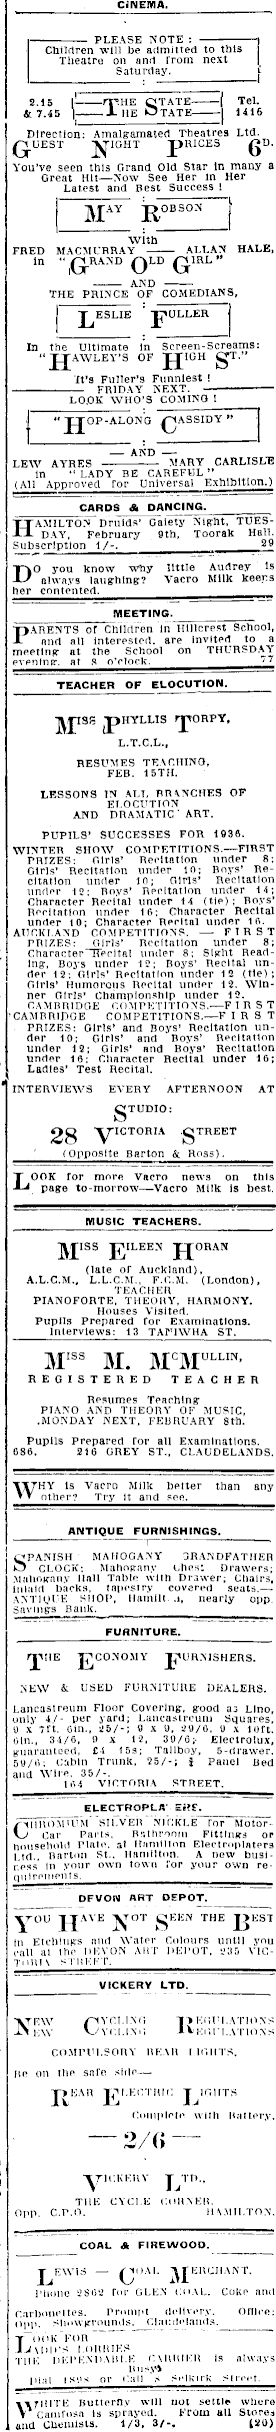 Papers Past Newspapers Waikato Times 3 February 1937 Page 1 Advertisements Column 5